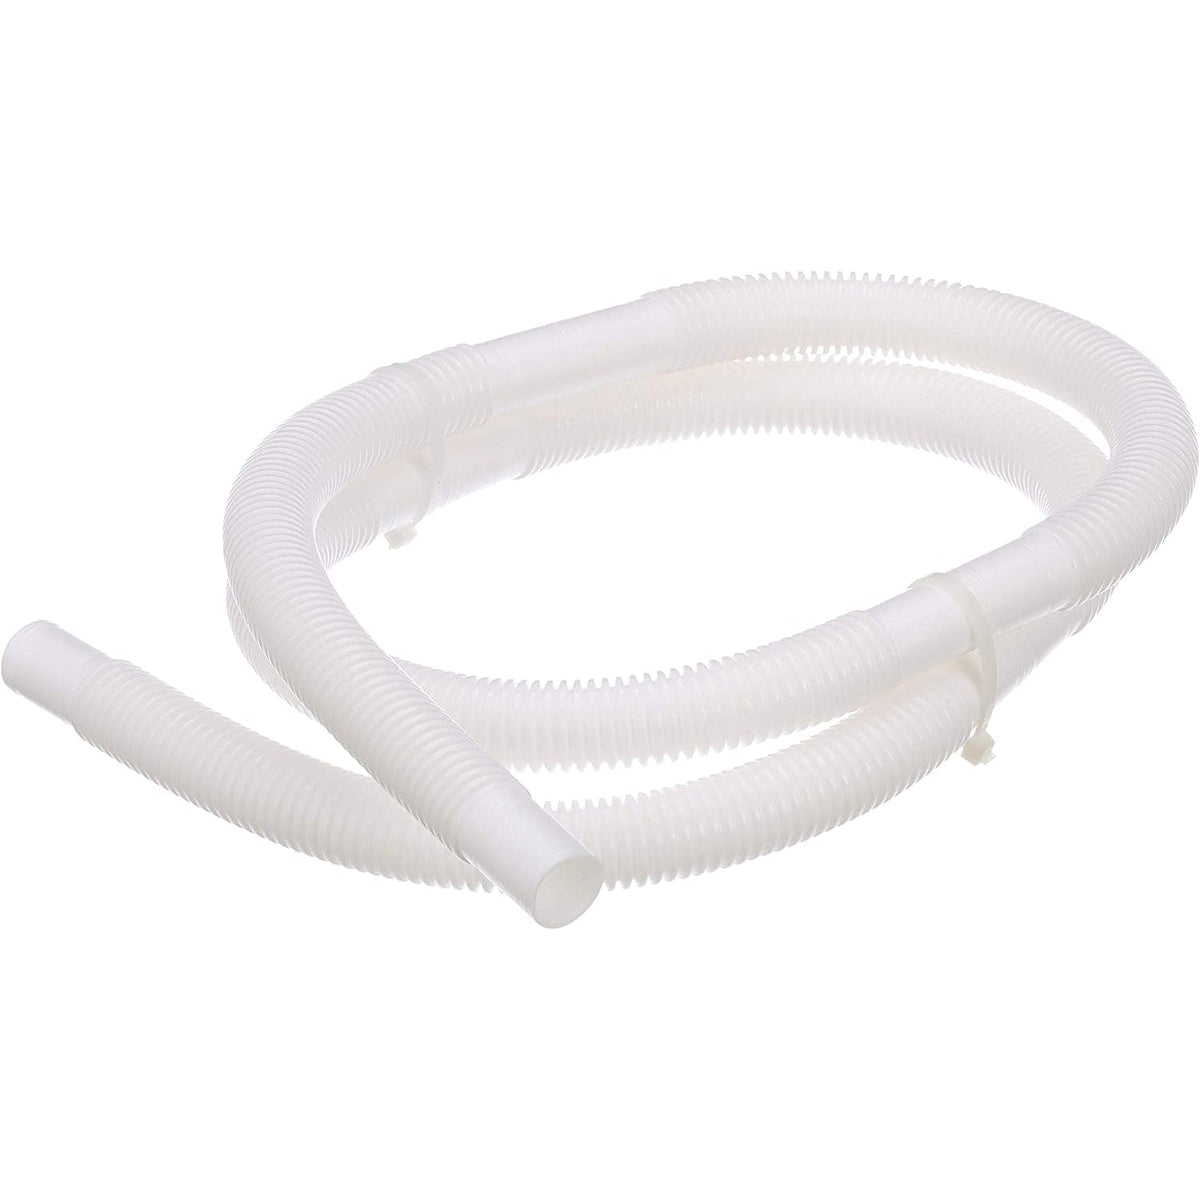 Attwood Marine Qualifies for Free Shipping Attwood Bilge Pump Hose 1-1/8" x 6' White #11551-5